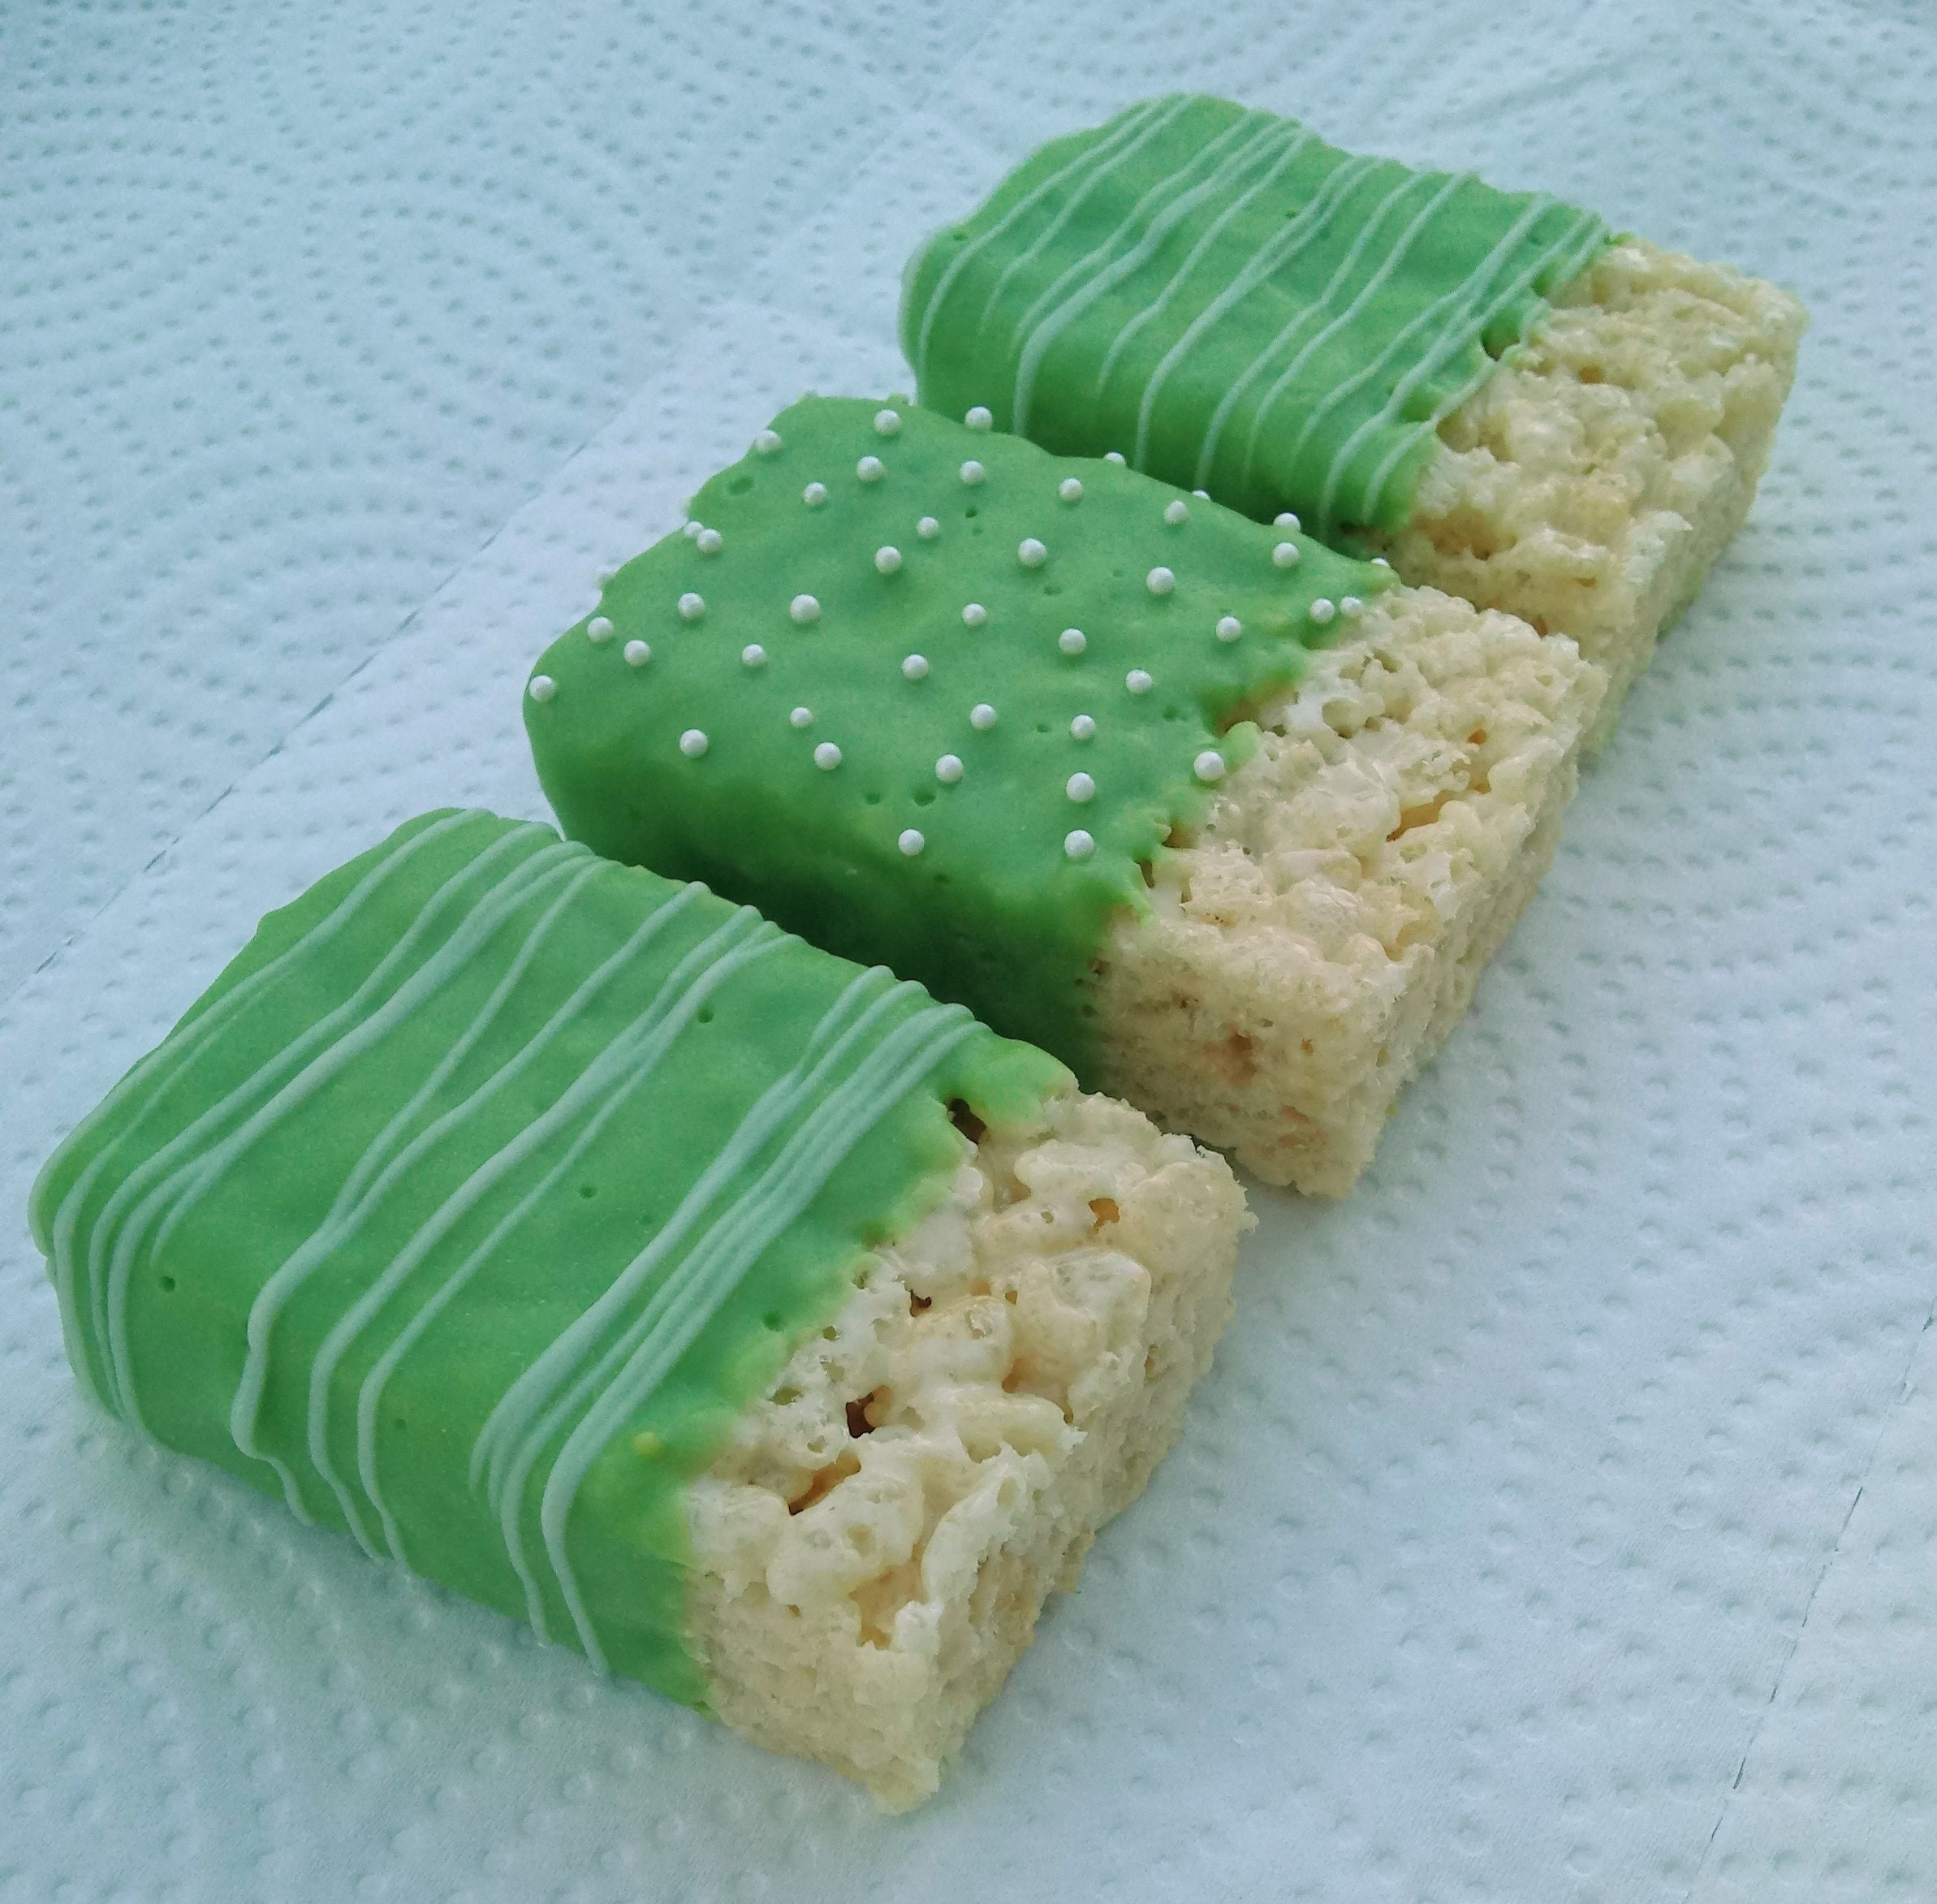 Chocolate-covered “Rice Krispies Treats” Pops – Yumminess on a